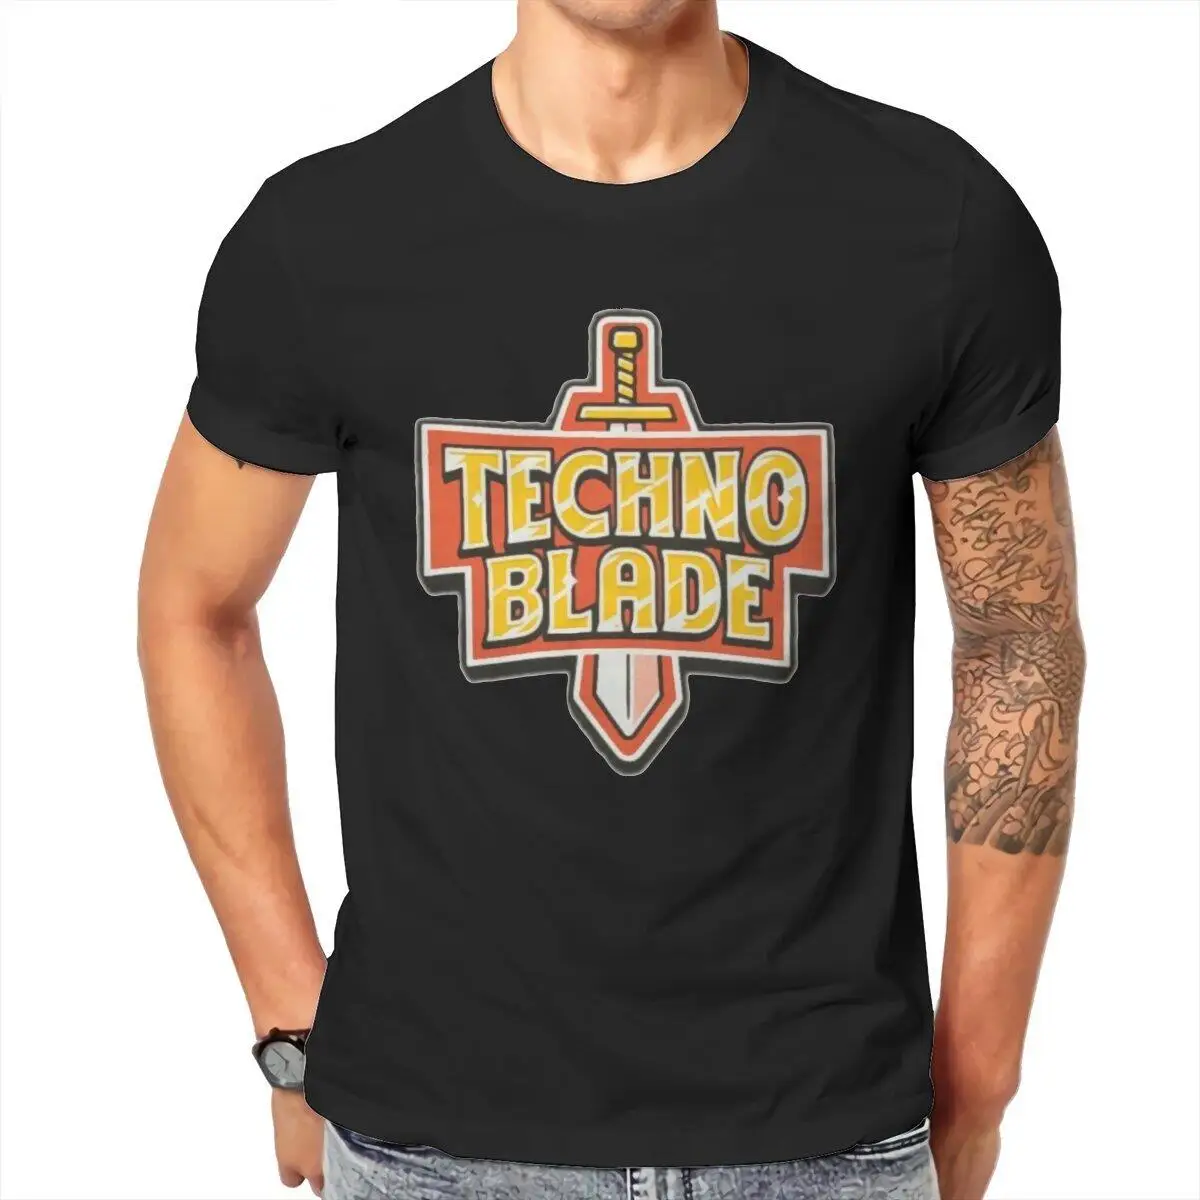 Men Technoblade Sword  T Shirt Gamer Cotton Clothes Funny Short Sleeve Round Collar Tees Plus Size T-Shirt